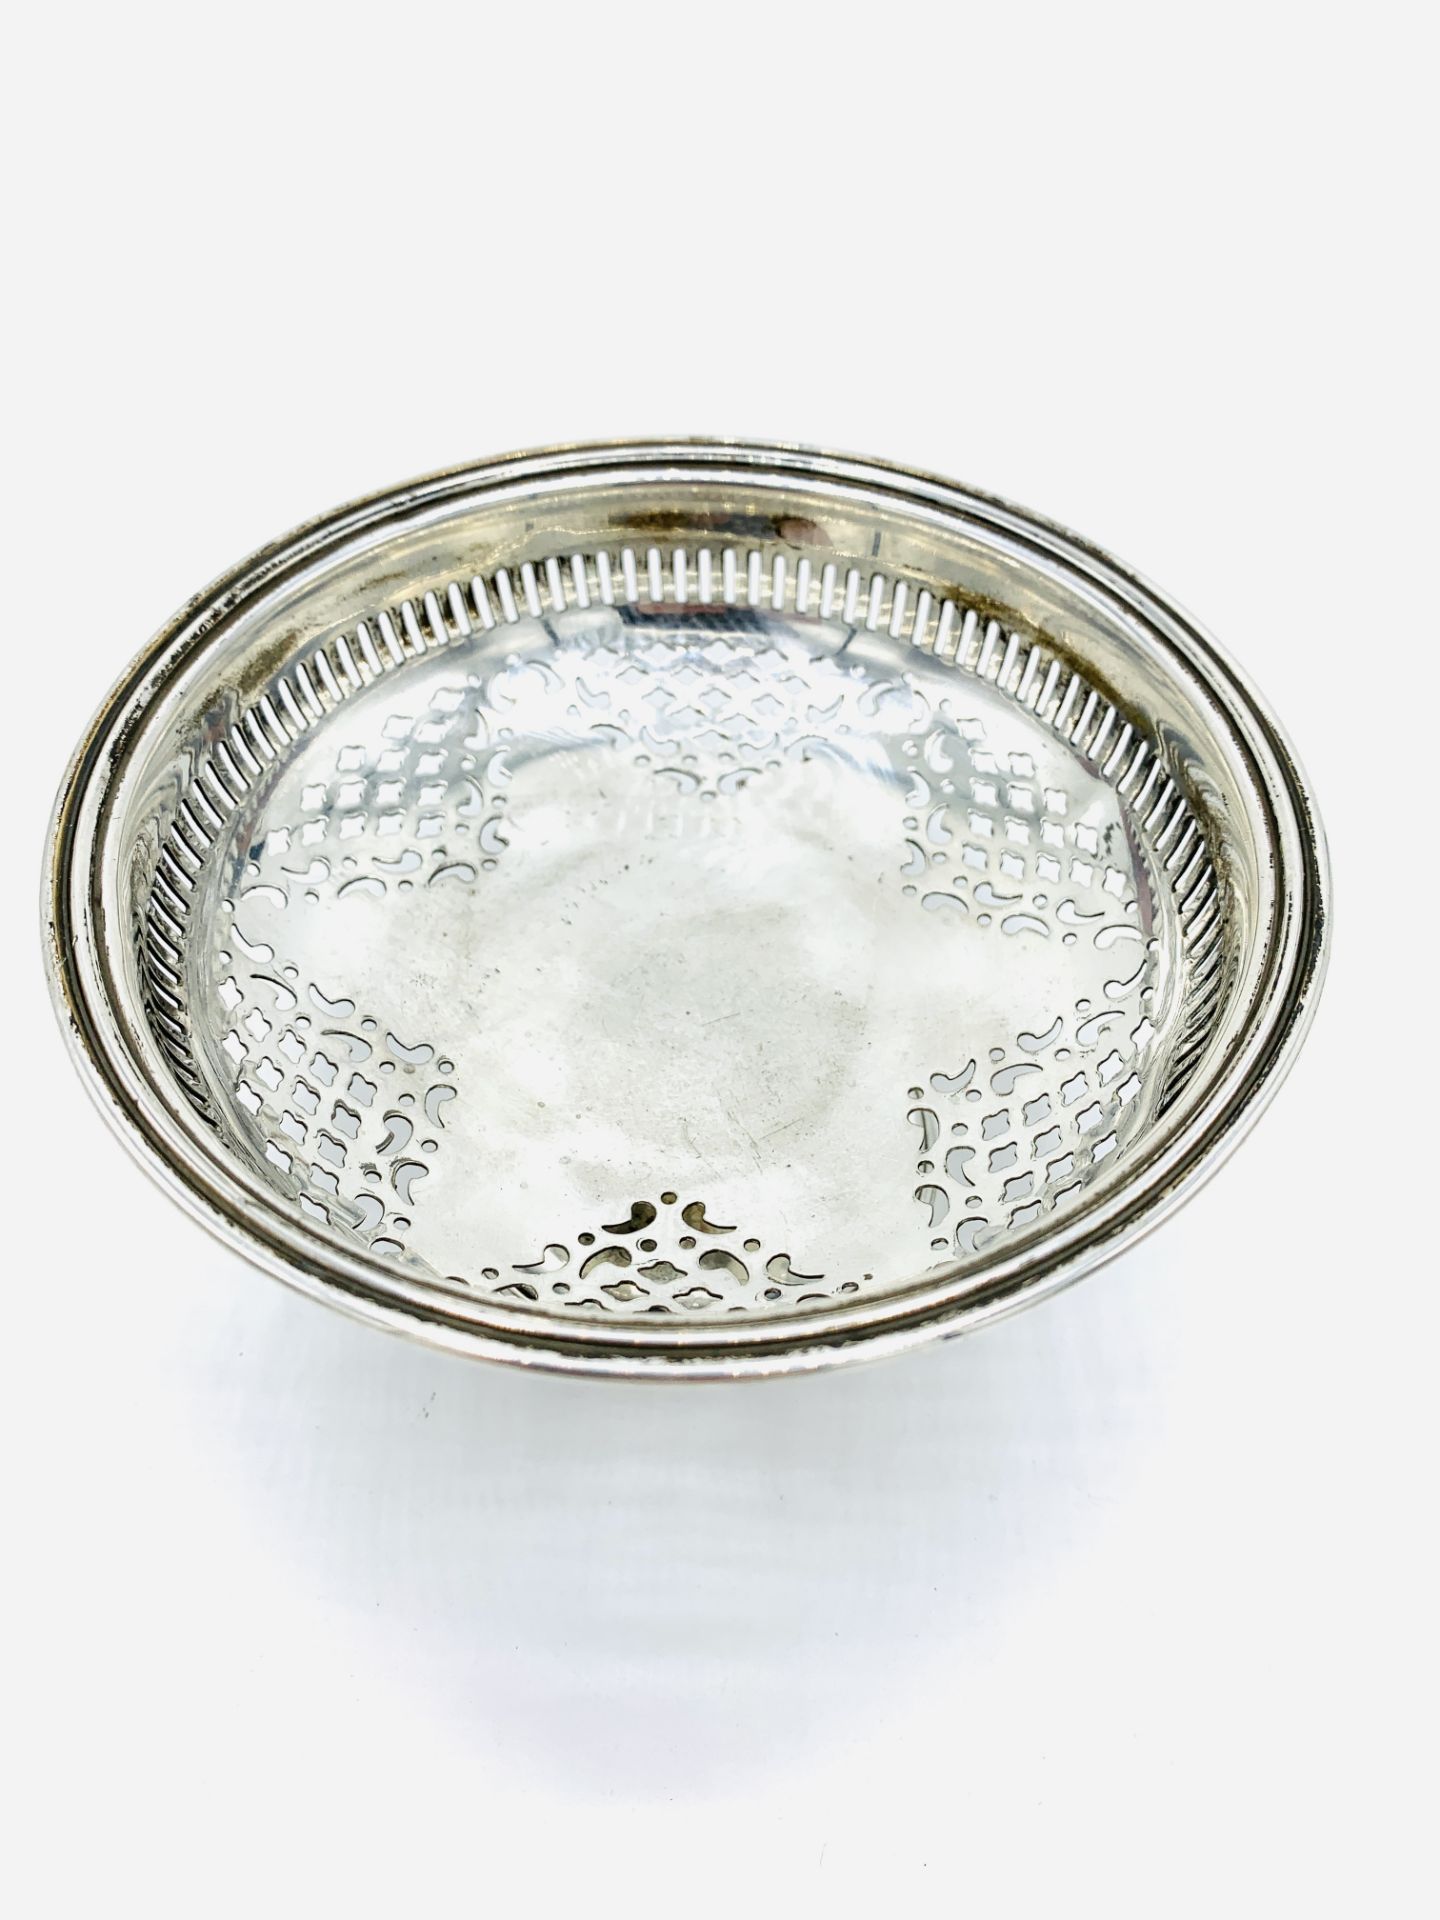 Sterling silver footed fruit dish - Image 2 of 3